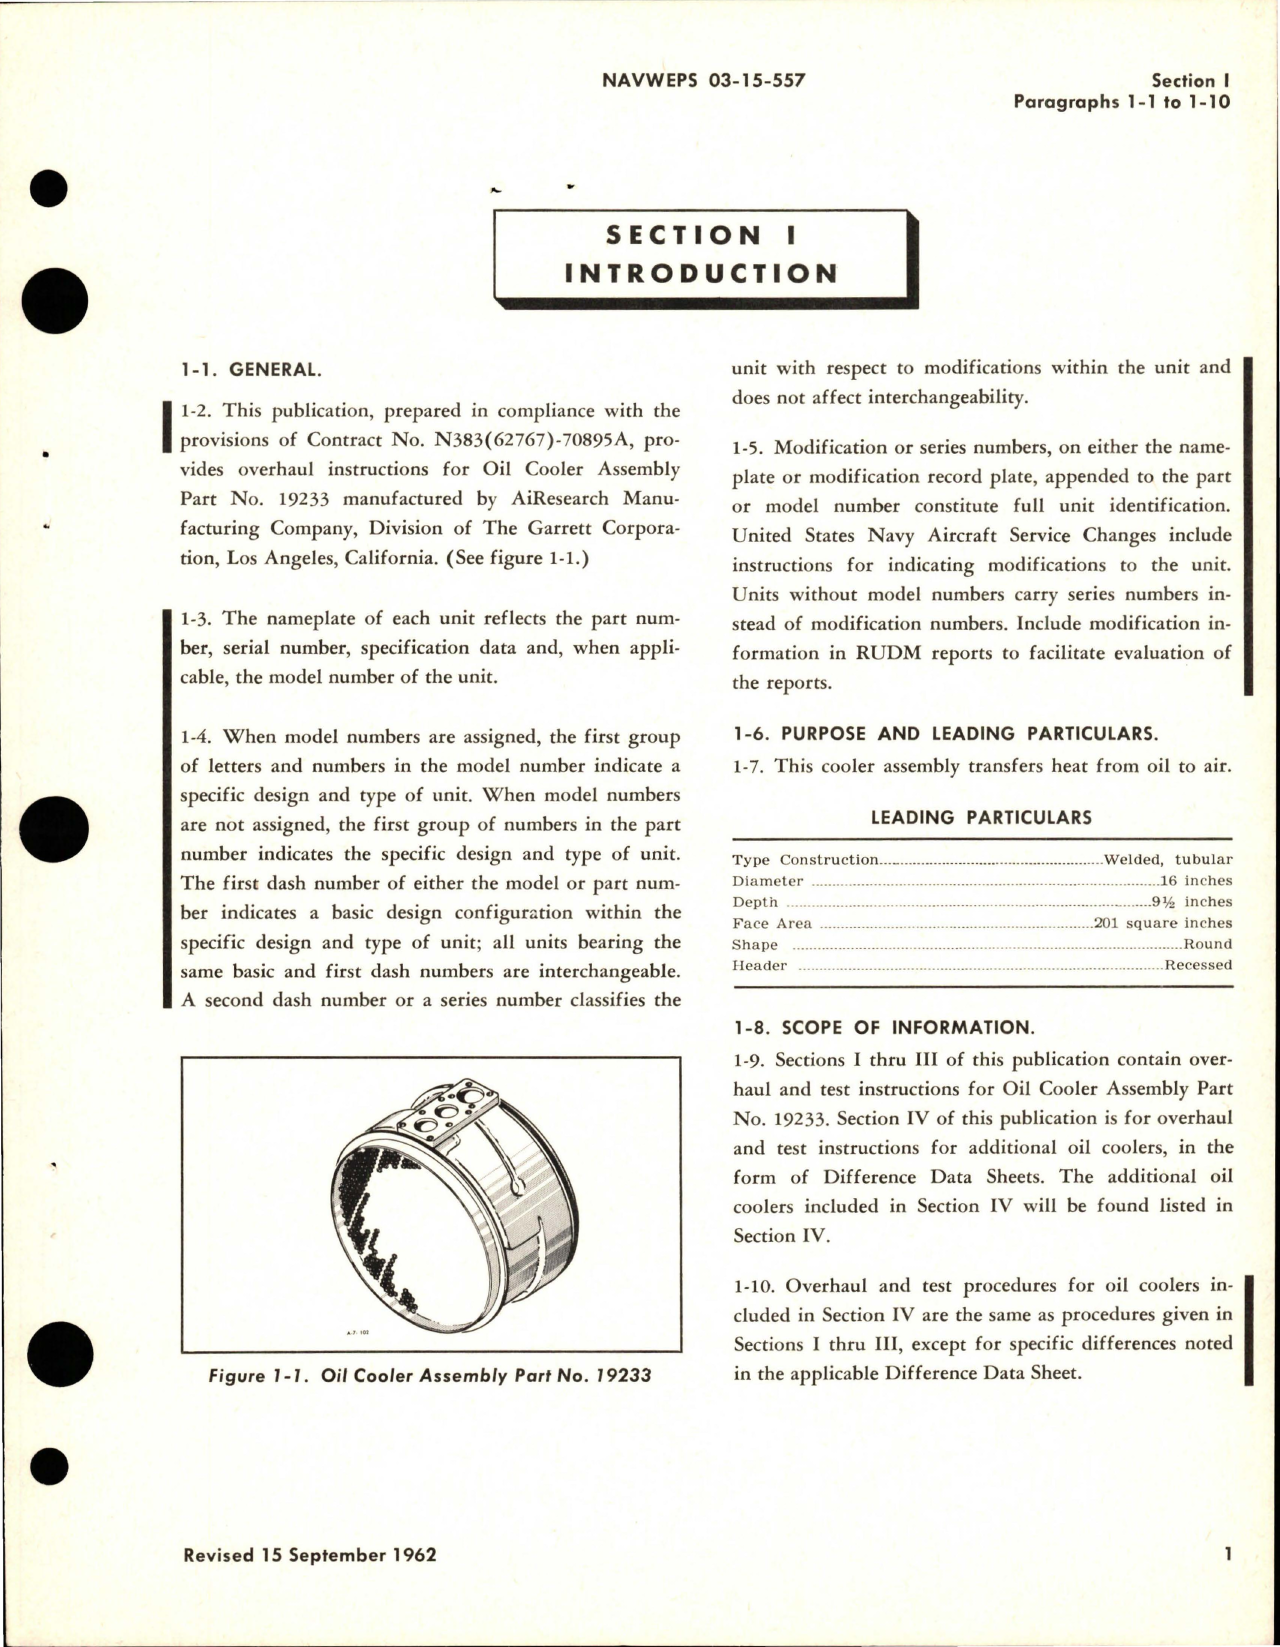 Sample page 5 from AirCorps Library document: Overhaul Instructions for Oil Coolers